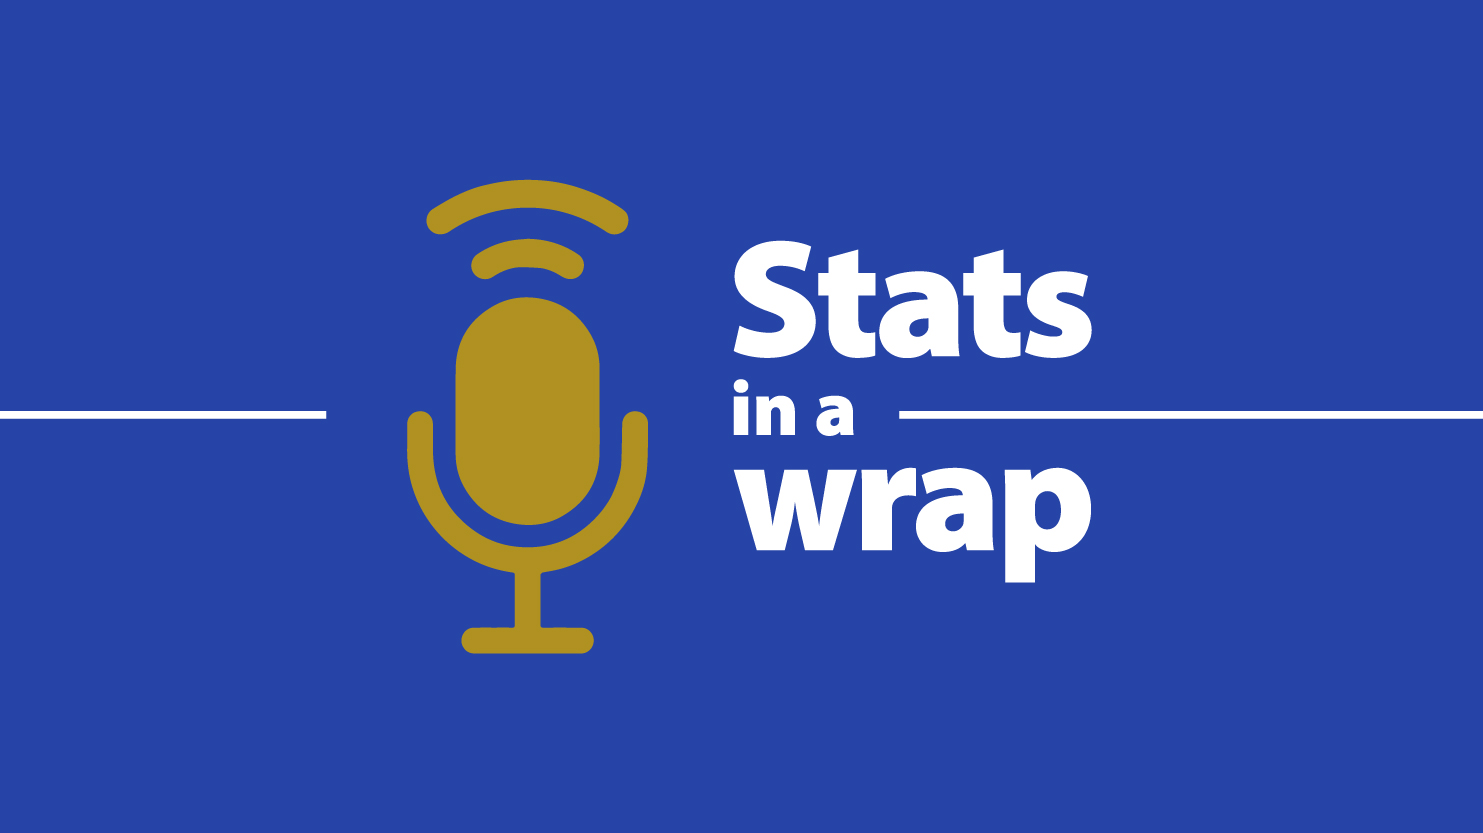 Image representing podcasts showing a microphone on the left and text on the right side saying Stats in a wrap